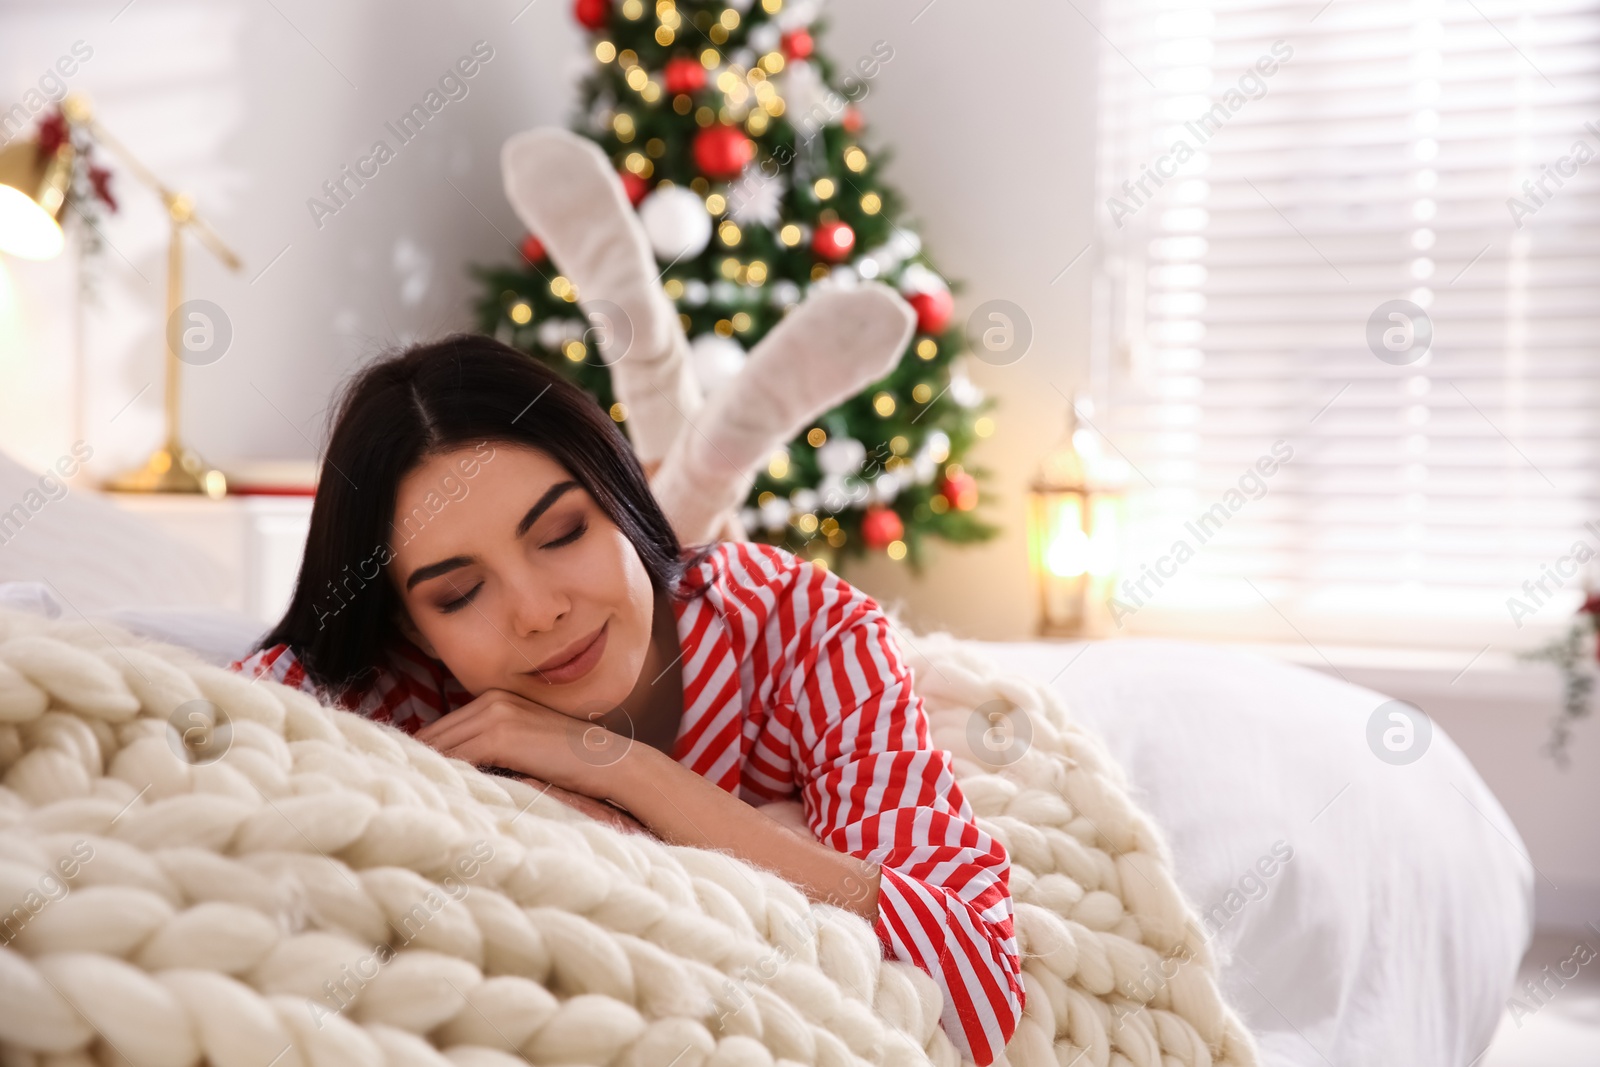 Photo of Young woman lying on bed in room with Christmas tree, space for text